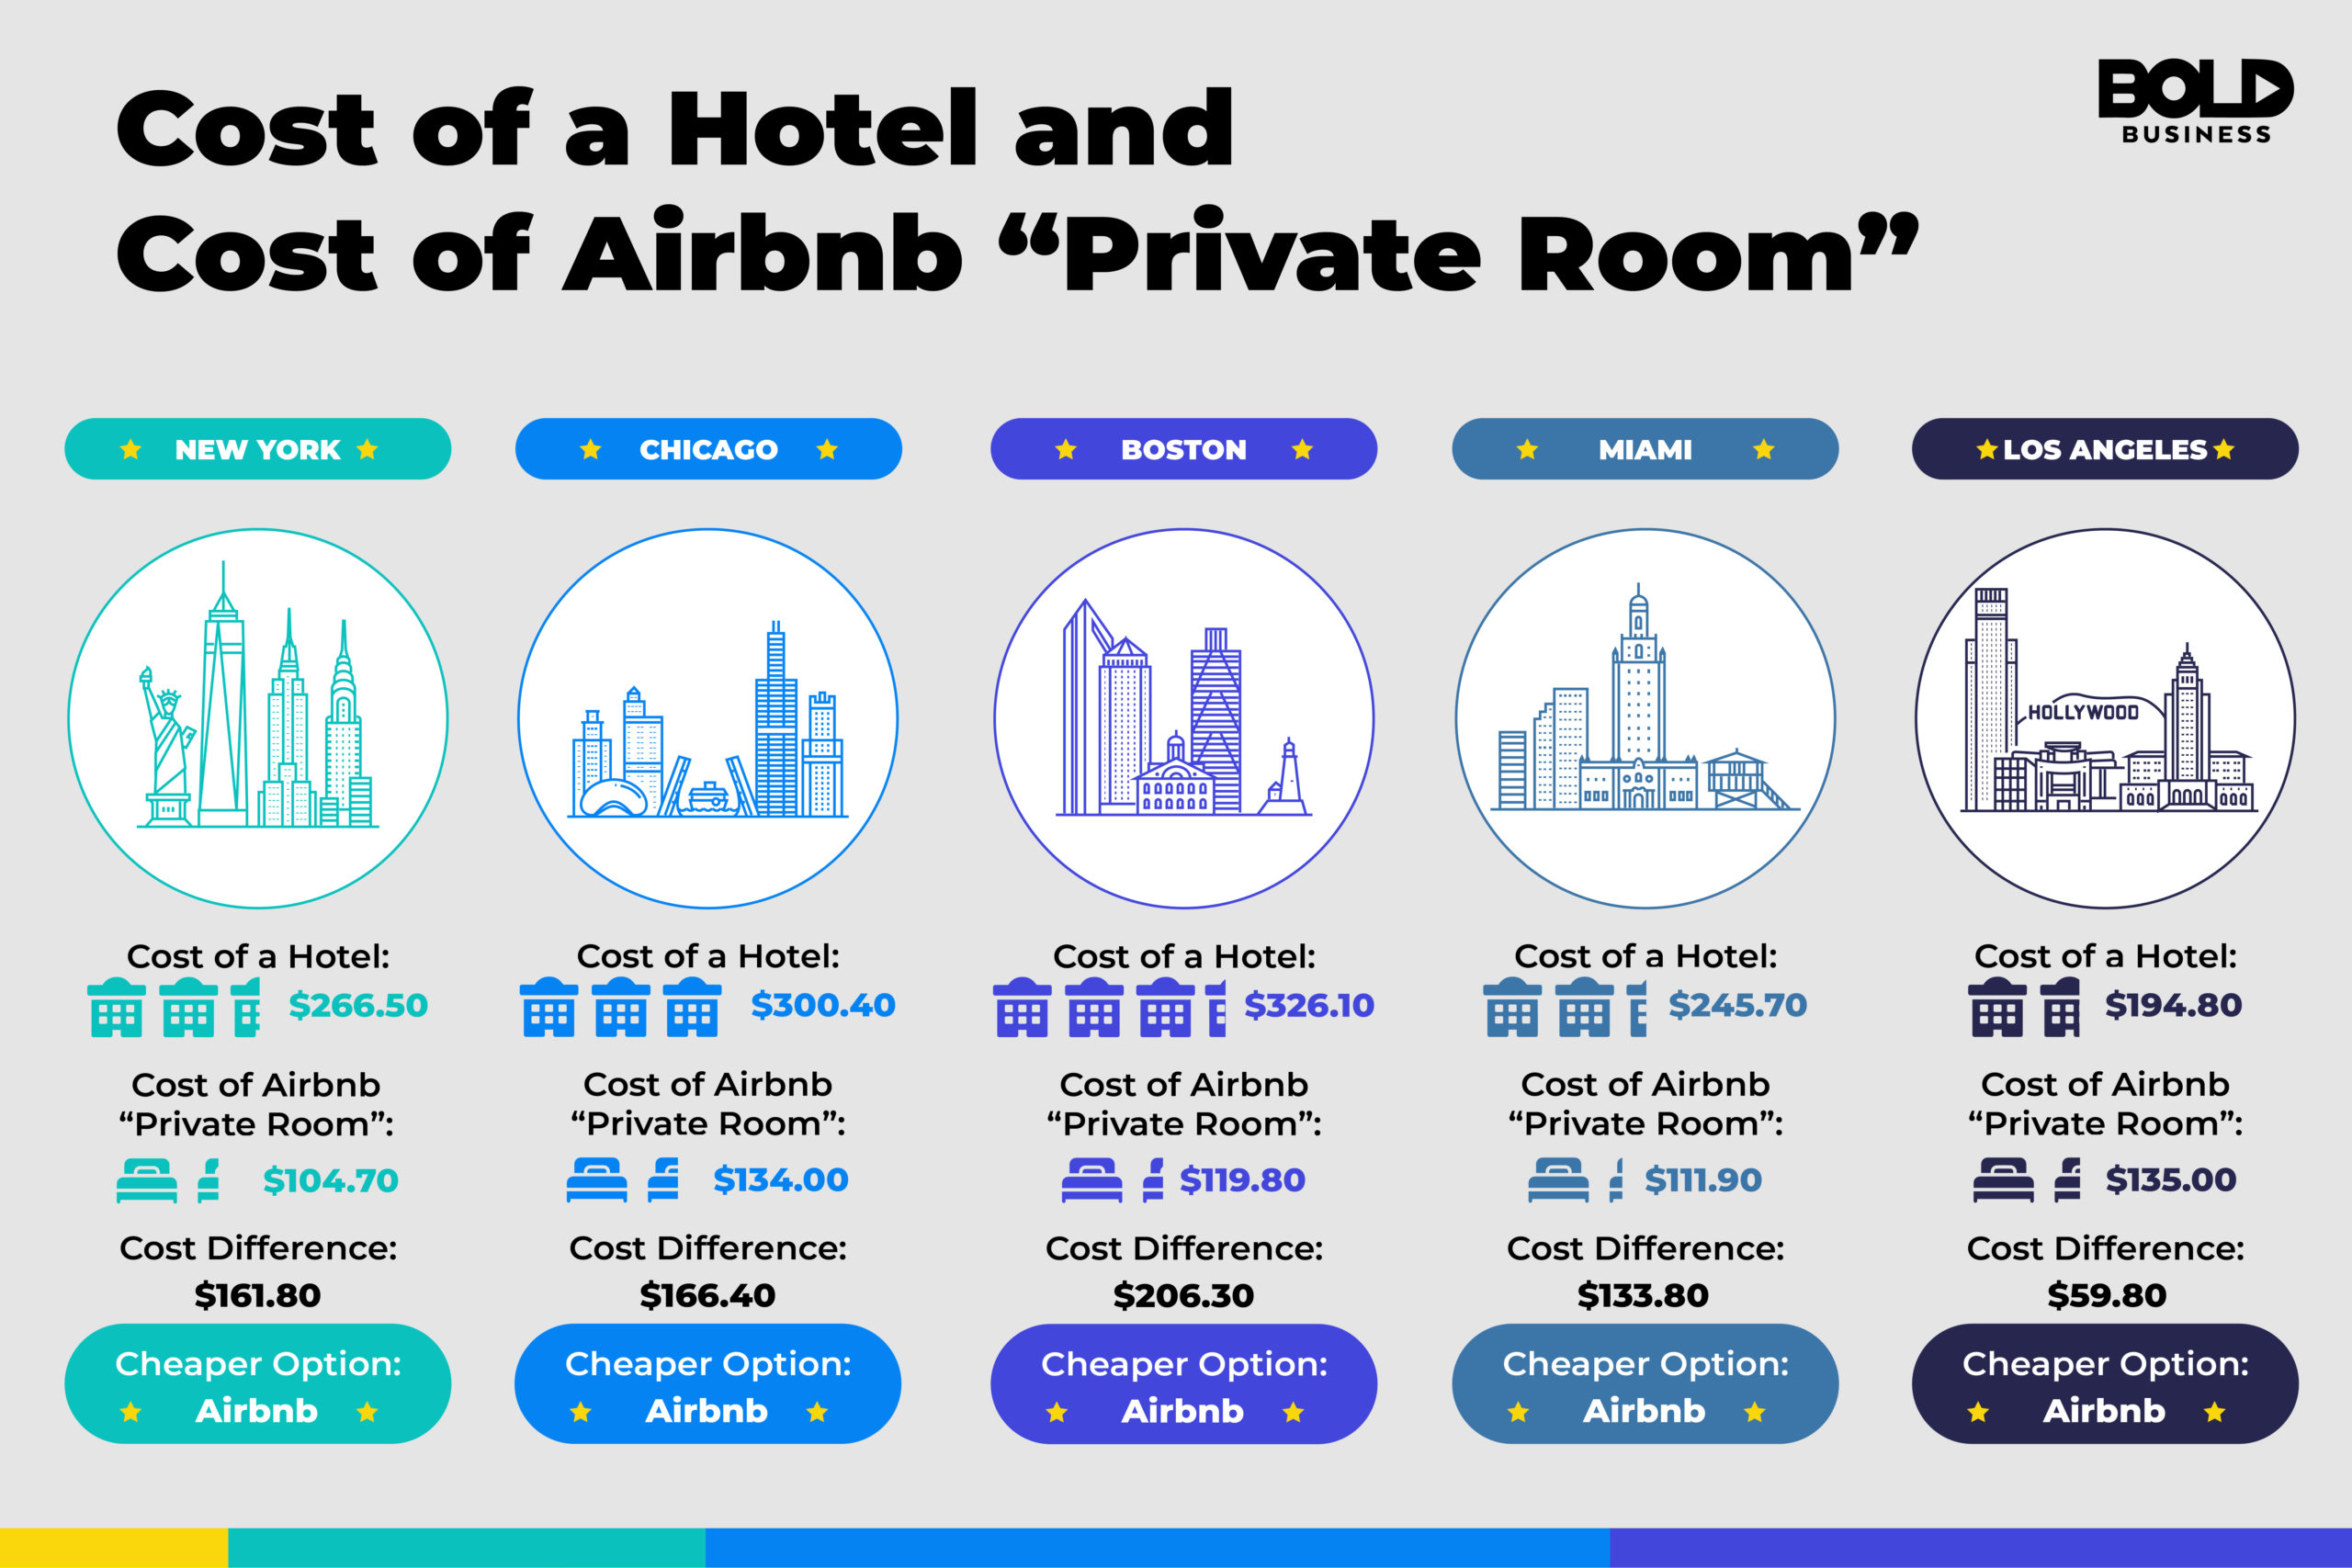 An infographic showing why Airbnb moguls are successful